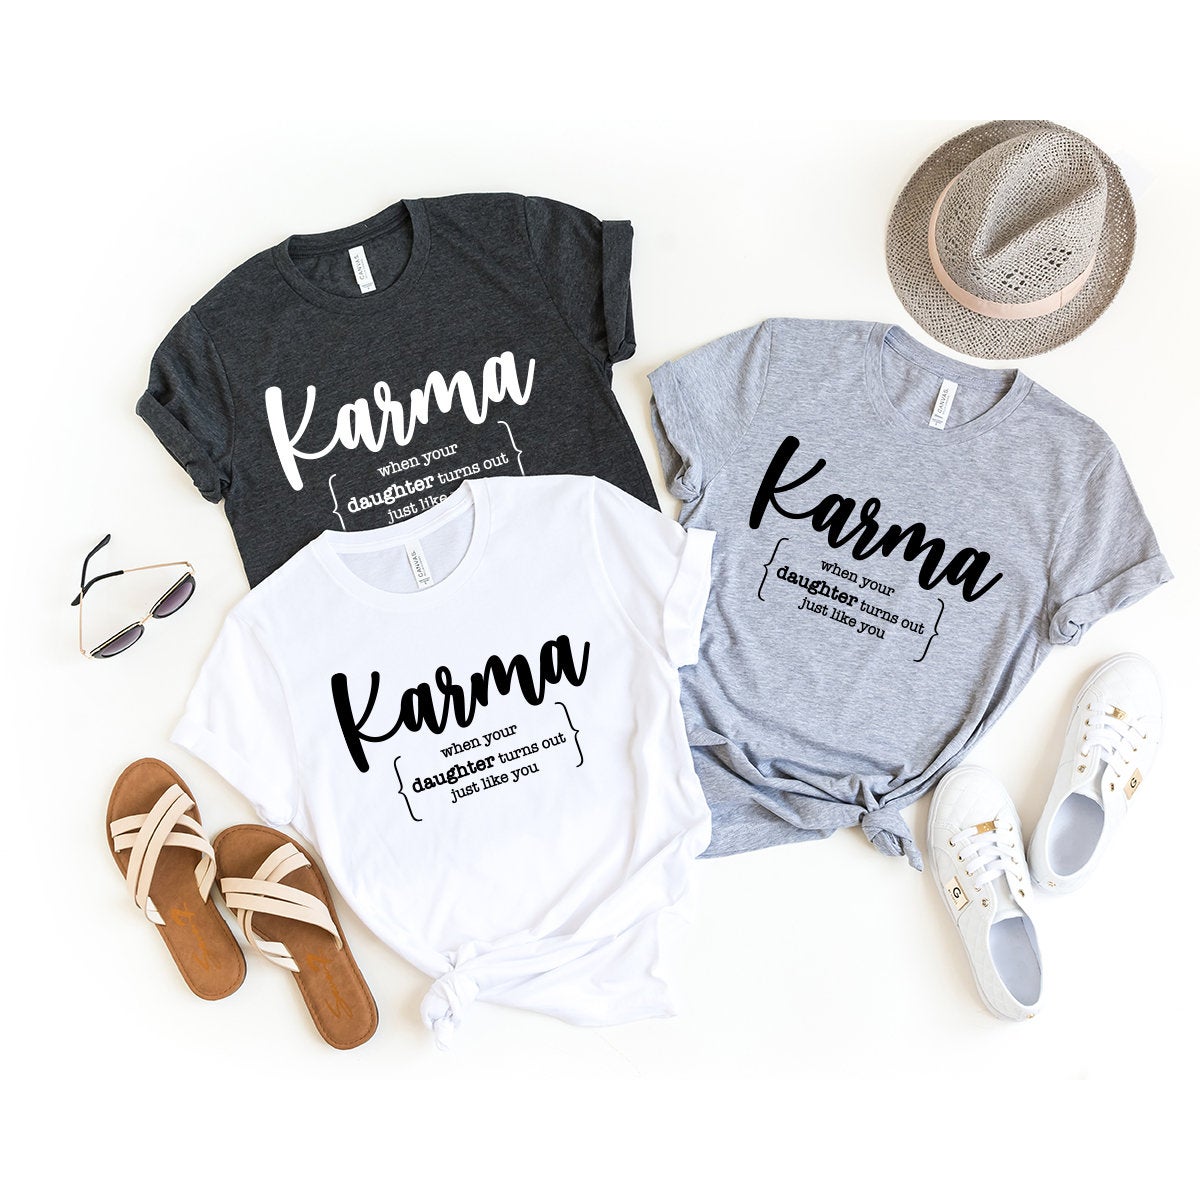 Karma Definition Shirt, Mom Of Girls Tee, Mom Life Shirt, Mom Birthday Gift, Funny Mom Shirt, When Your Daughter Turns Out Just Like You - Fastdeliverytees.com